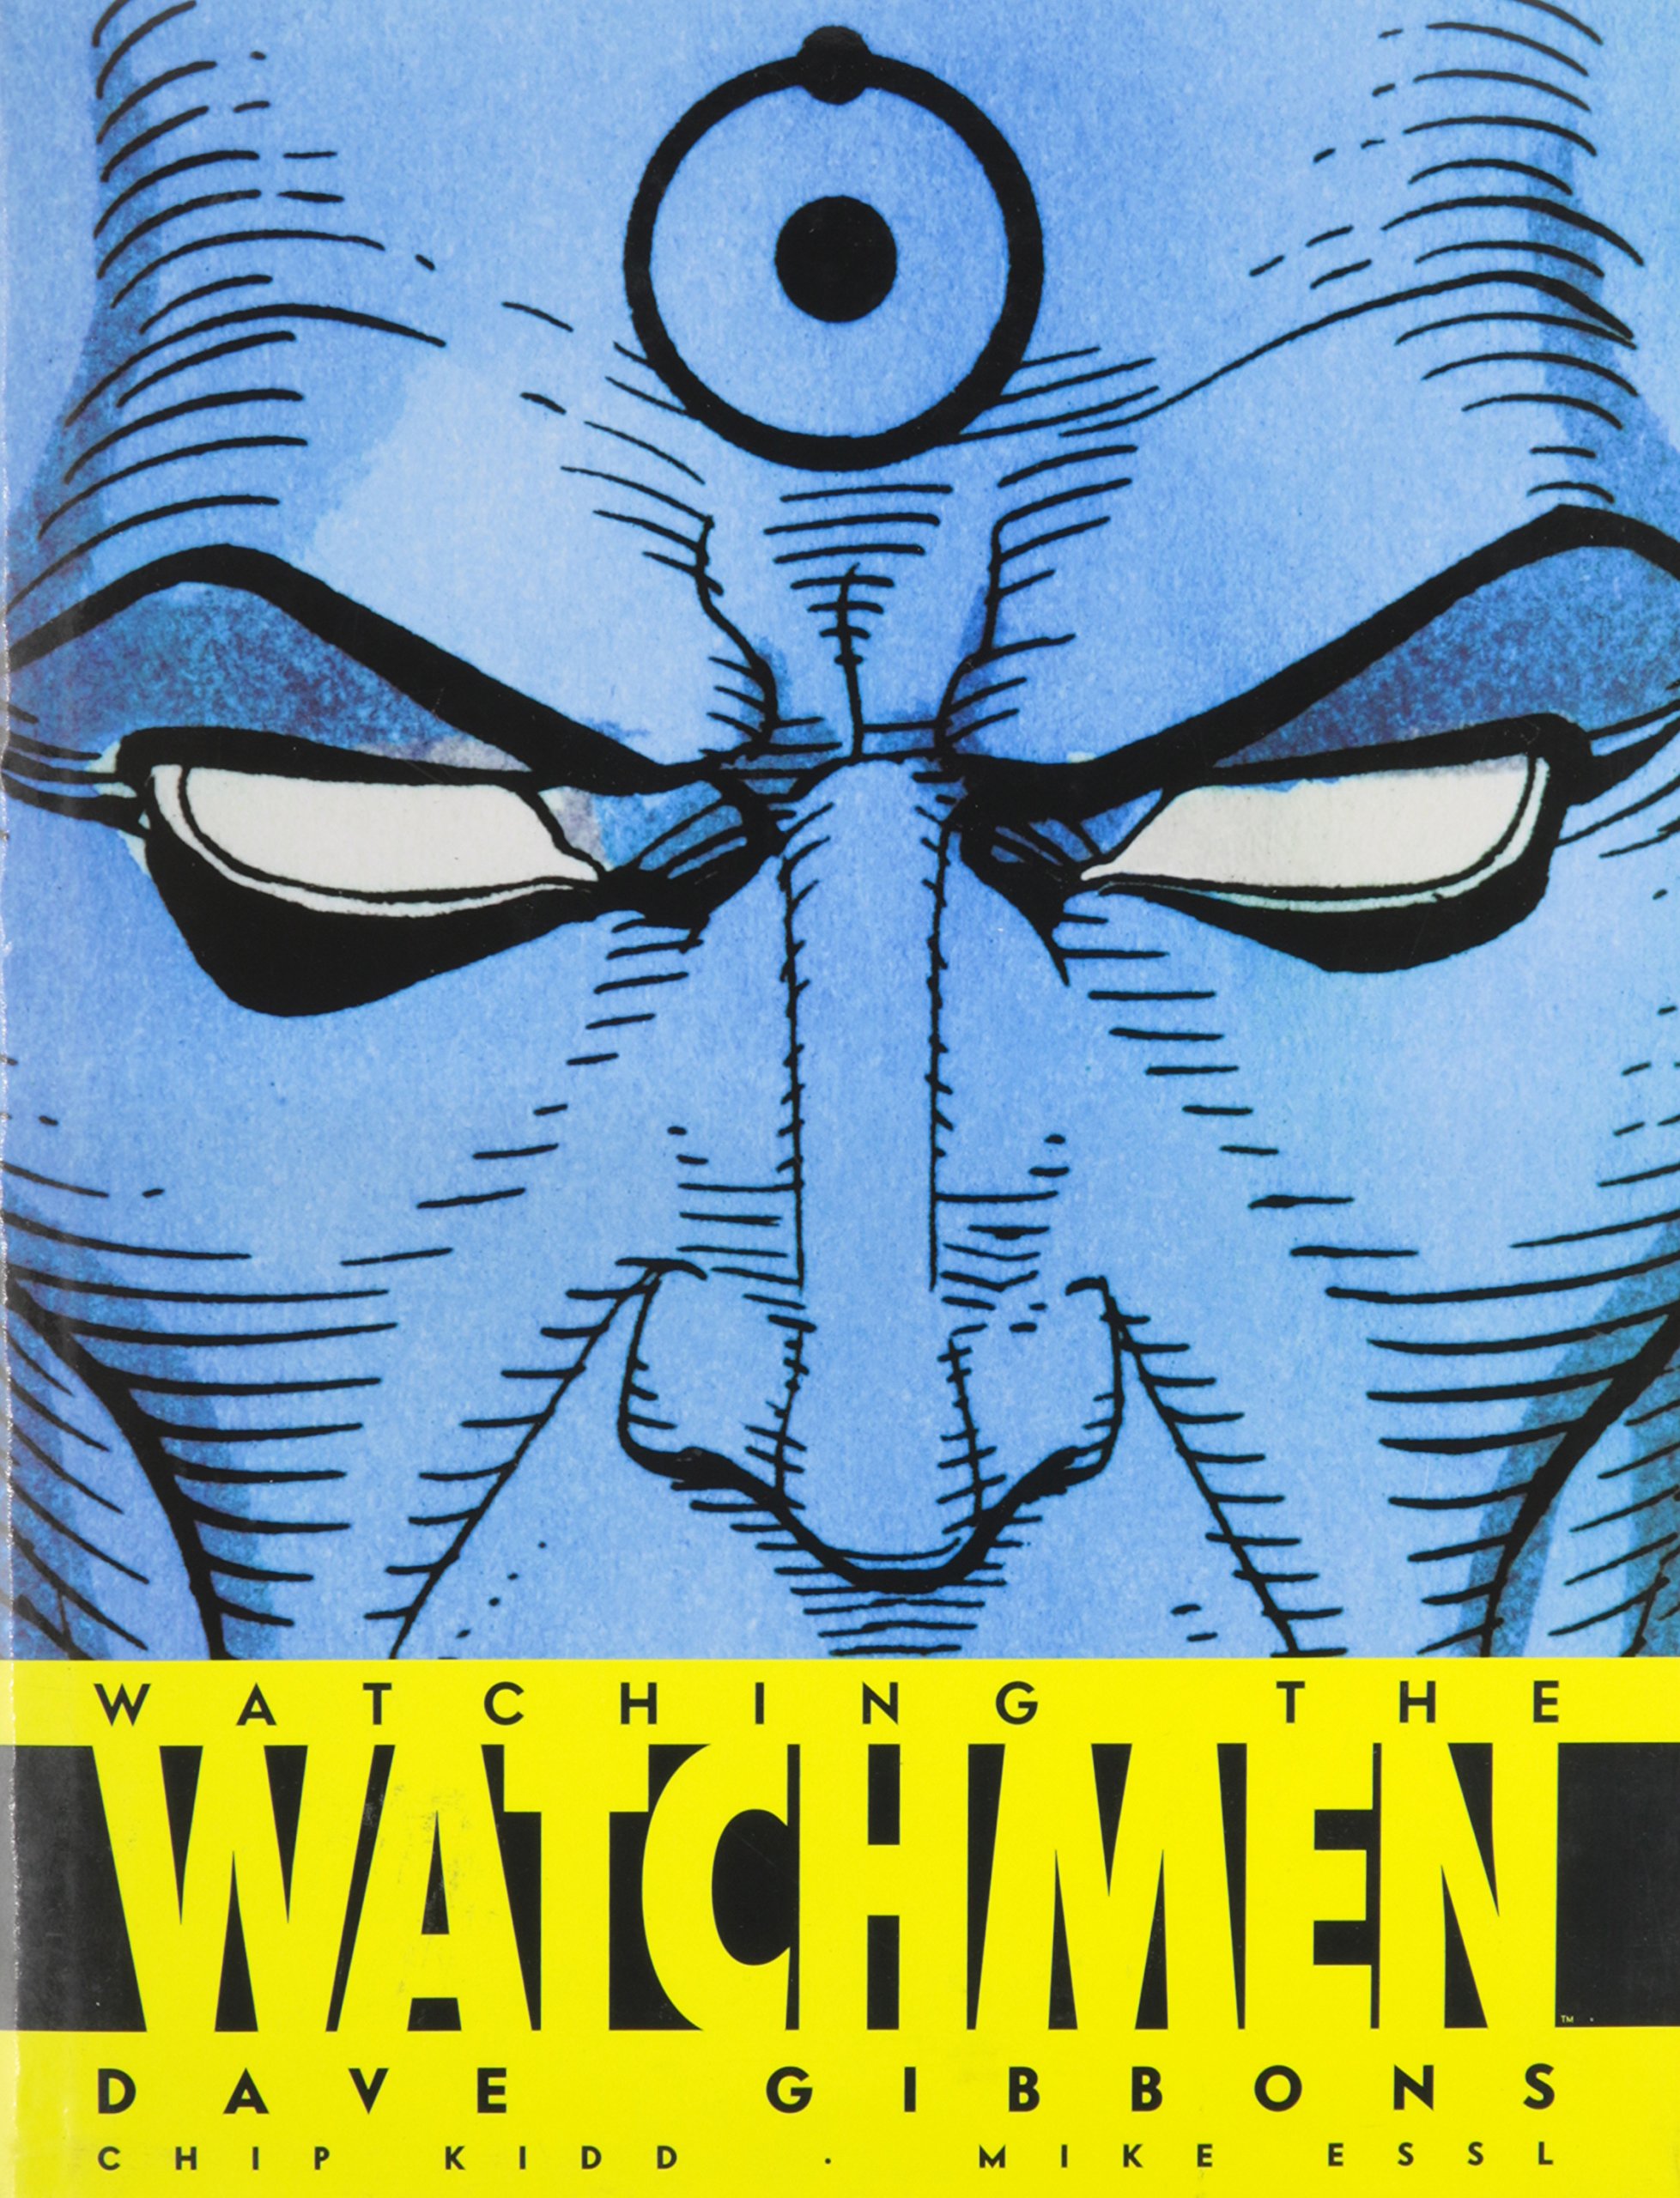 Watching the Watchmen | Dave Gibbons